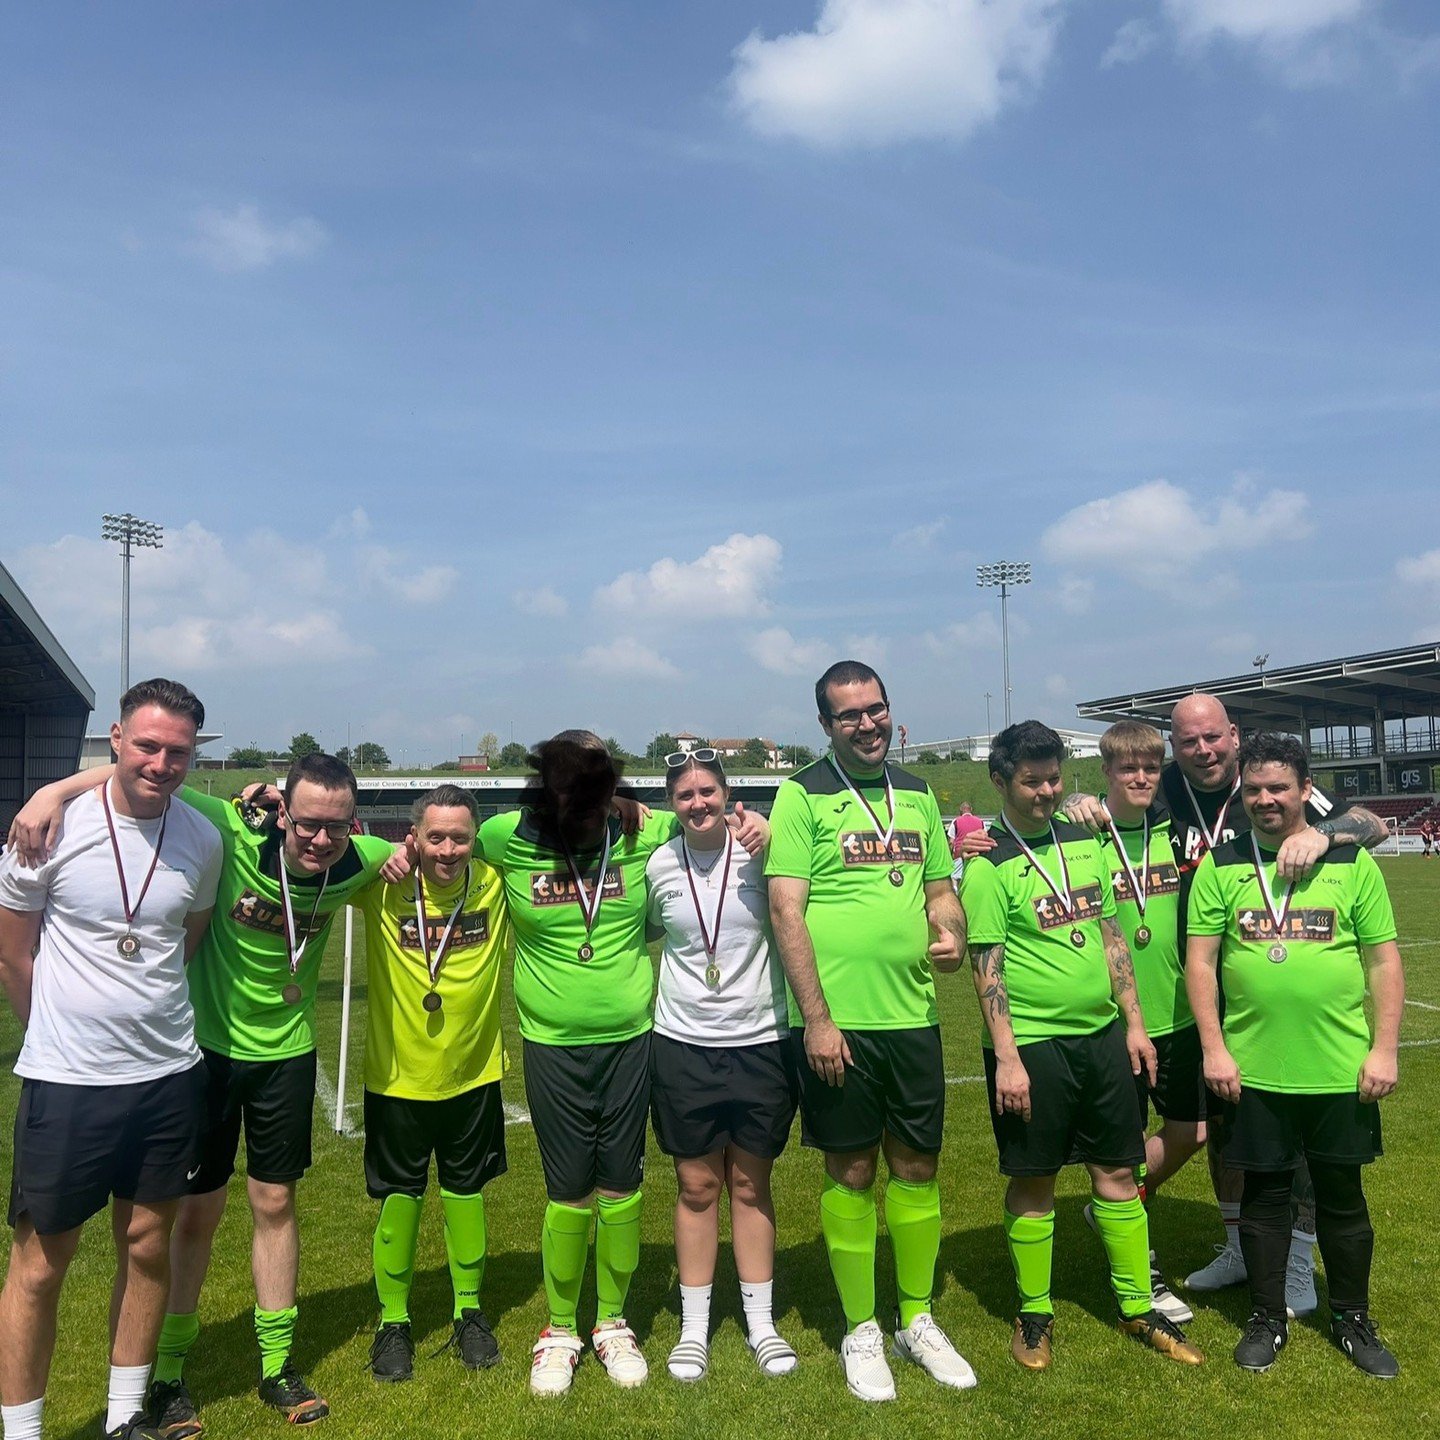 🌟 What a fantastic day for @ntfc_community Pan Disability Tournament! Huge thanks for inviting us, we had an amazing time. The standard was incredibly high and we can't wait for our new training sessions to up our game even more! The team absolutely